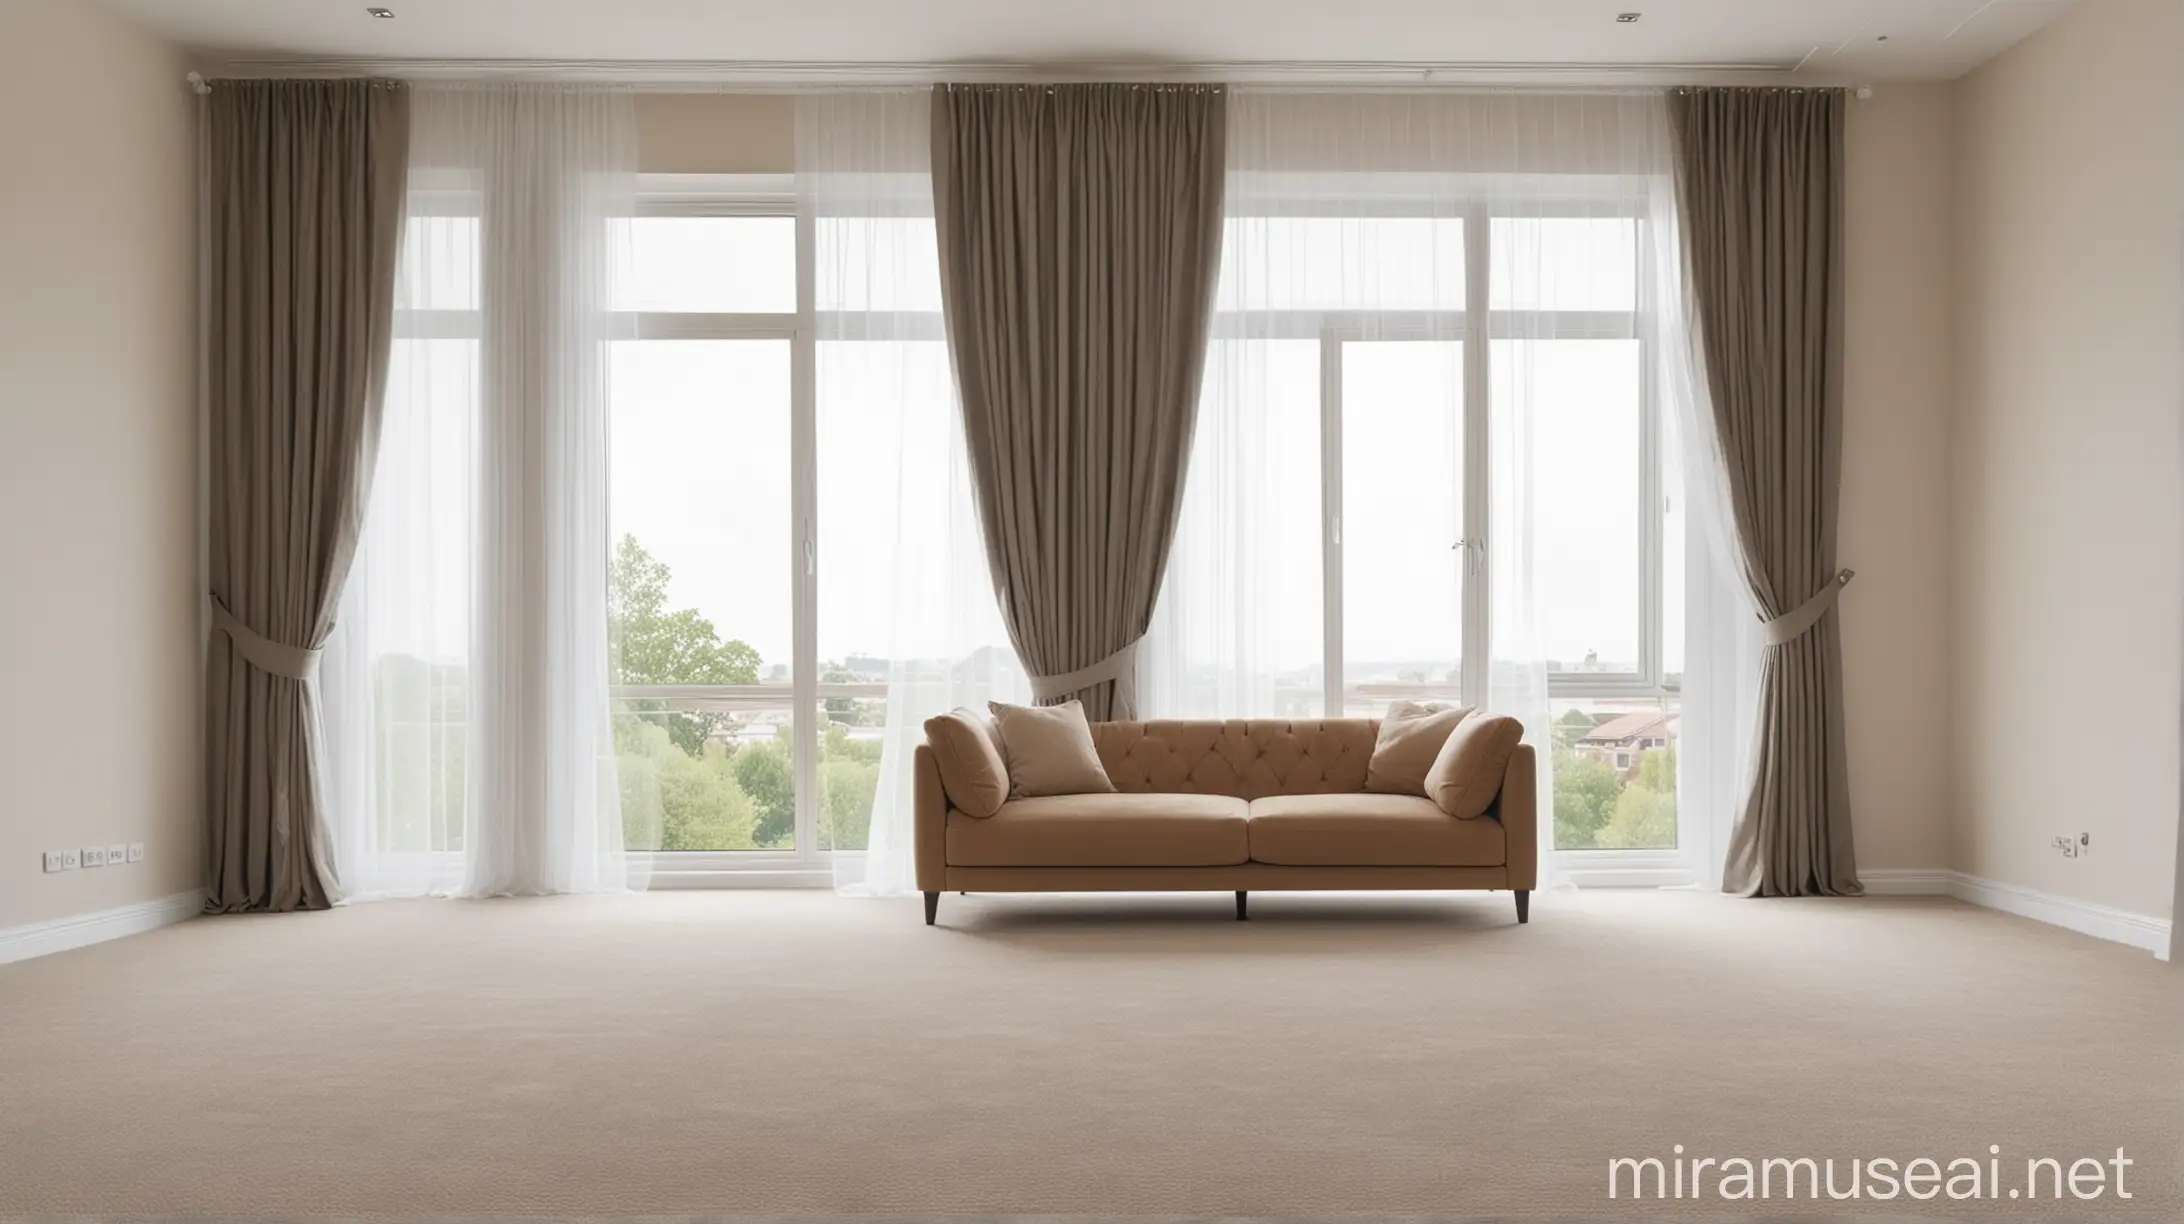 Modern Living Room with Carpet Sofa and FloortoCeiling Window